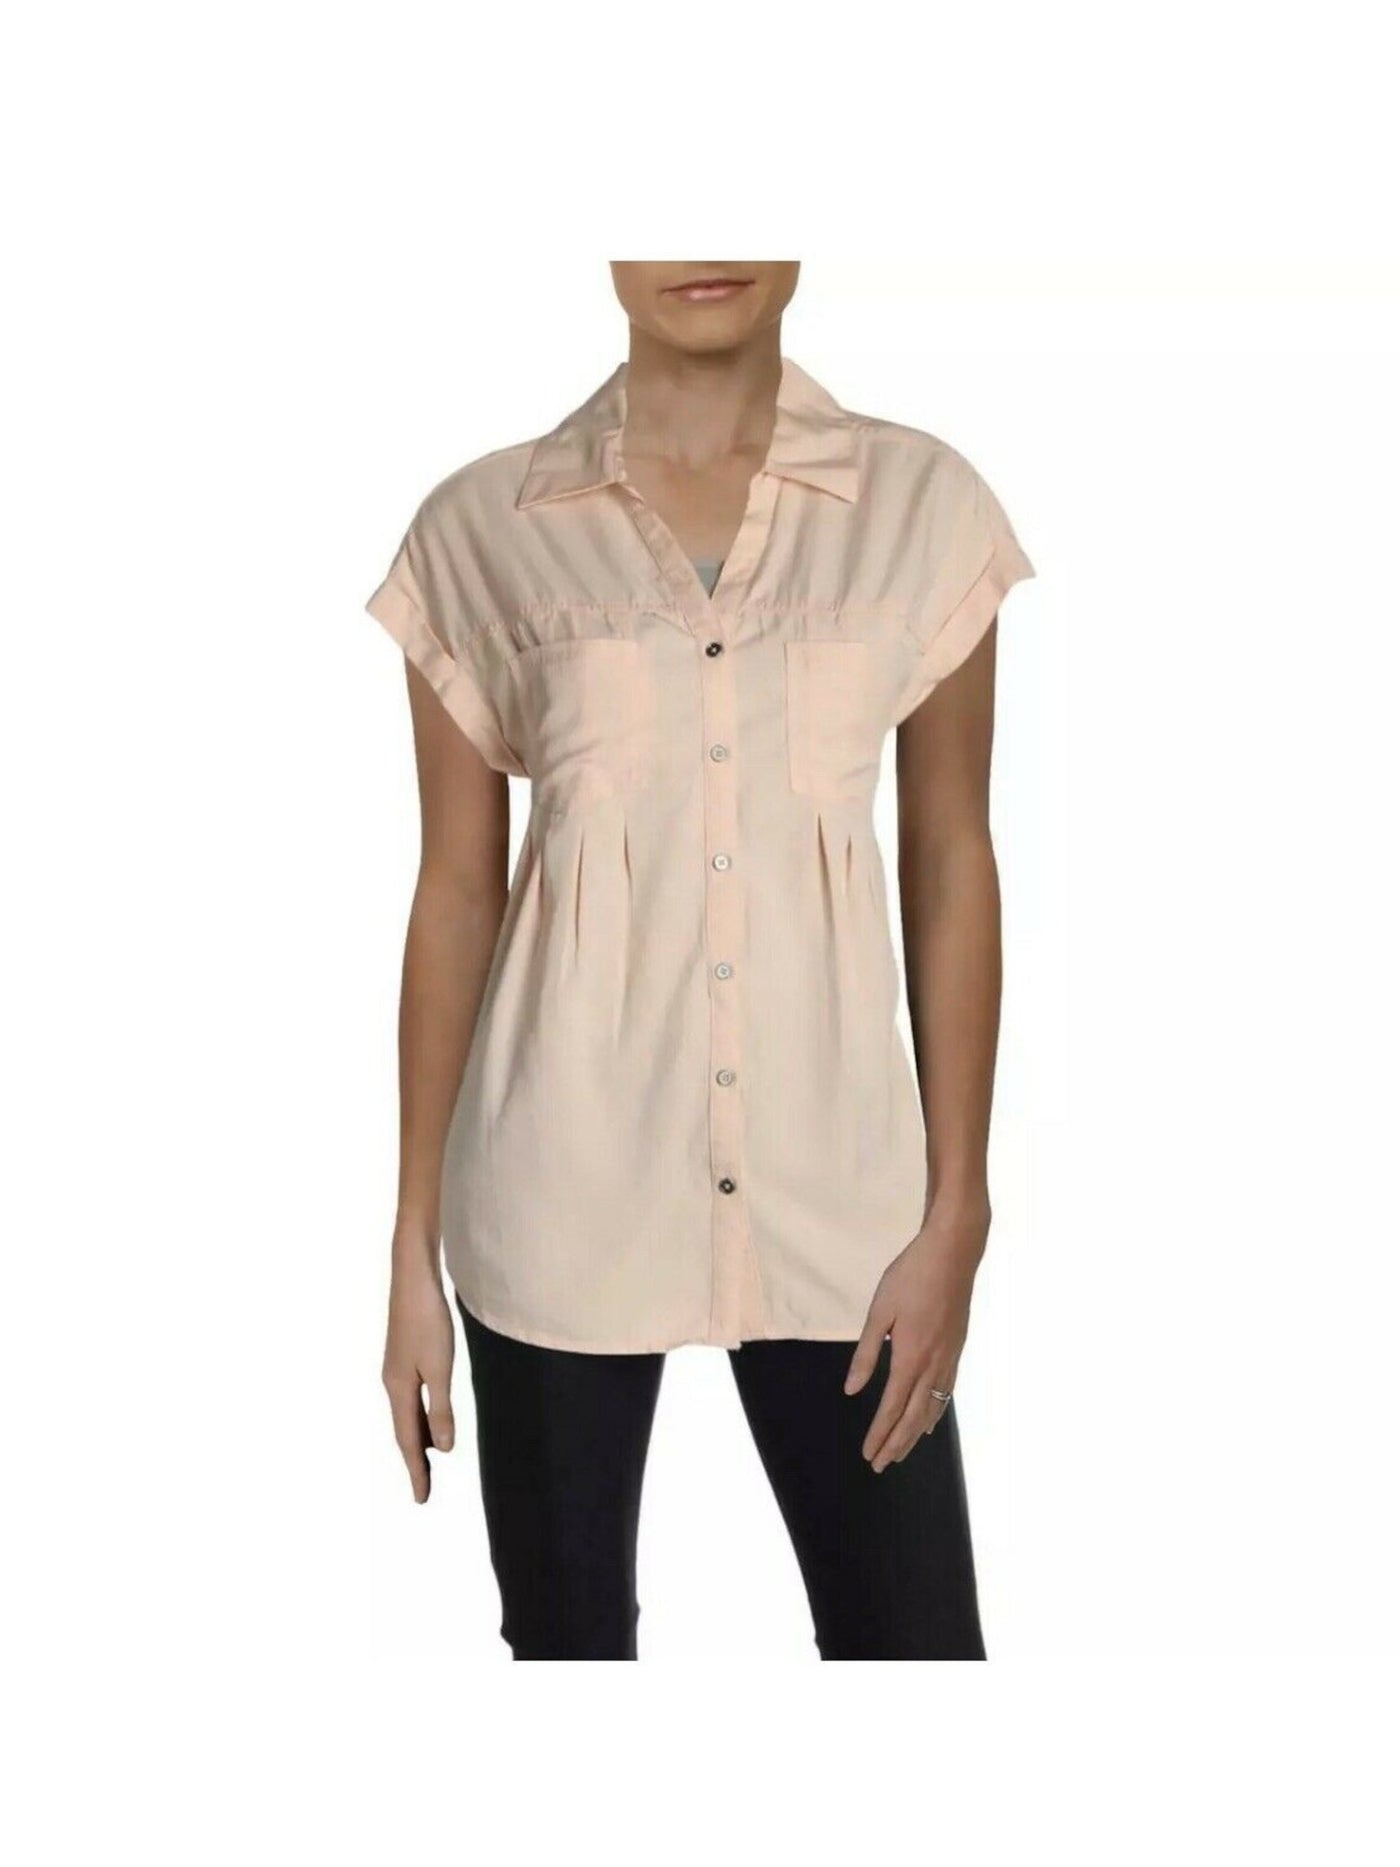 STYLE & COMPANY Womens Pink Collared Short Sleeve Henley Wear To Work Button Up Top XS